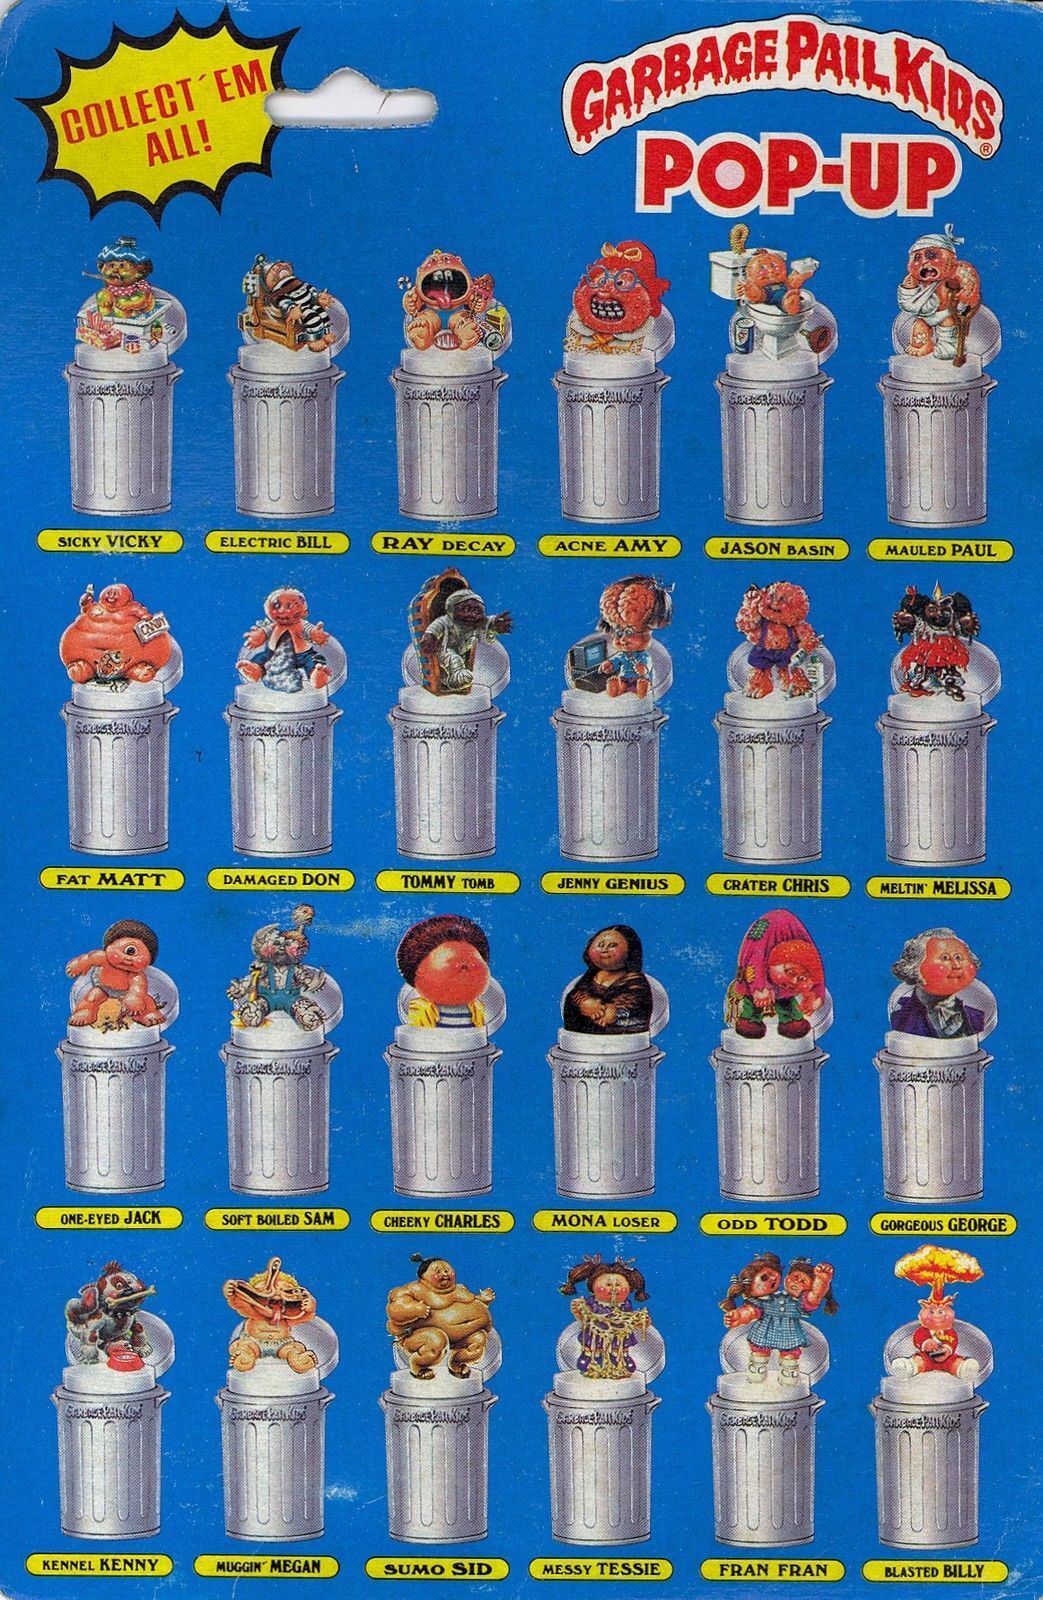 1985 Topps Imperial Toys GARBAGE PAIL KIDS GORGEOUS GEORGE Pop-Up GPK Image 2